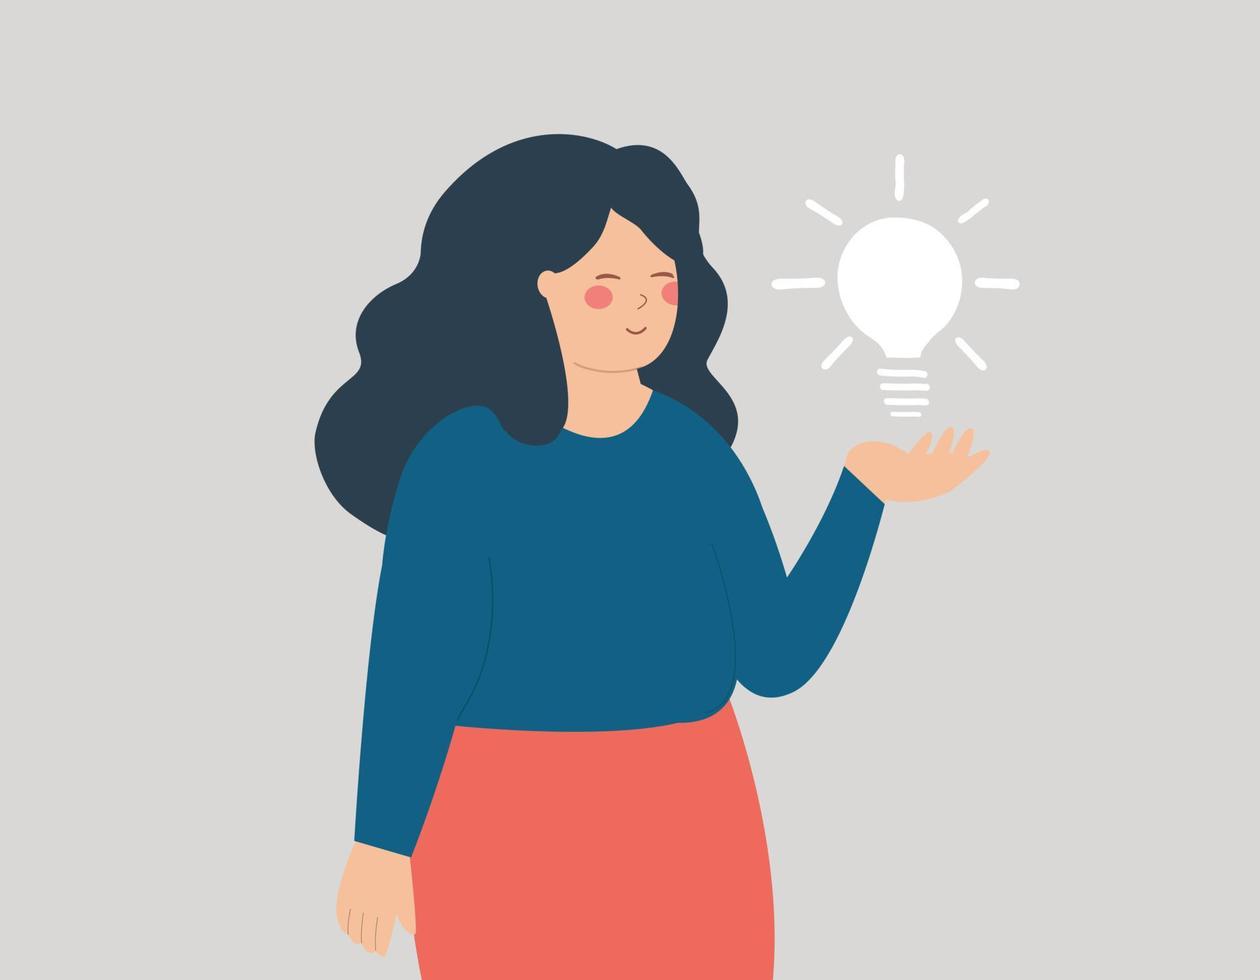 Businesswoman hold a business idea and looks confident of herself. Young entrepreneur female points with her index finger on a light bulb over her. Concept of creativity, innovation, solution, mindset vector